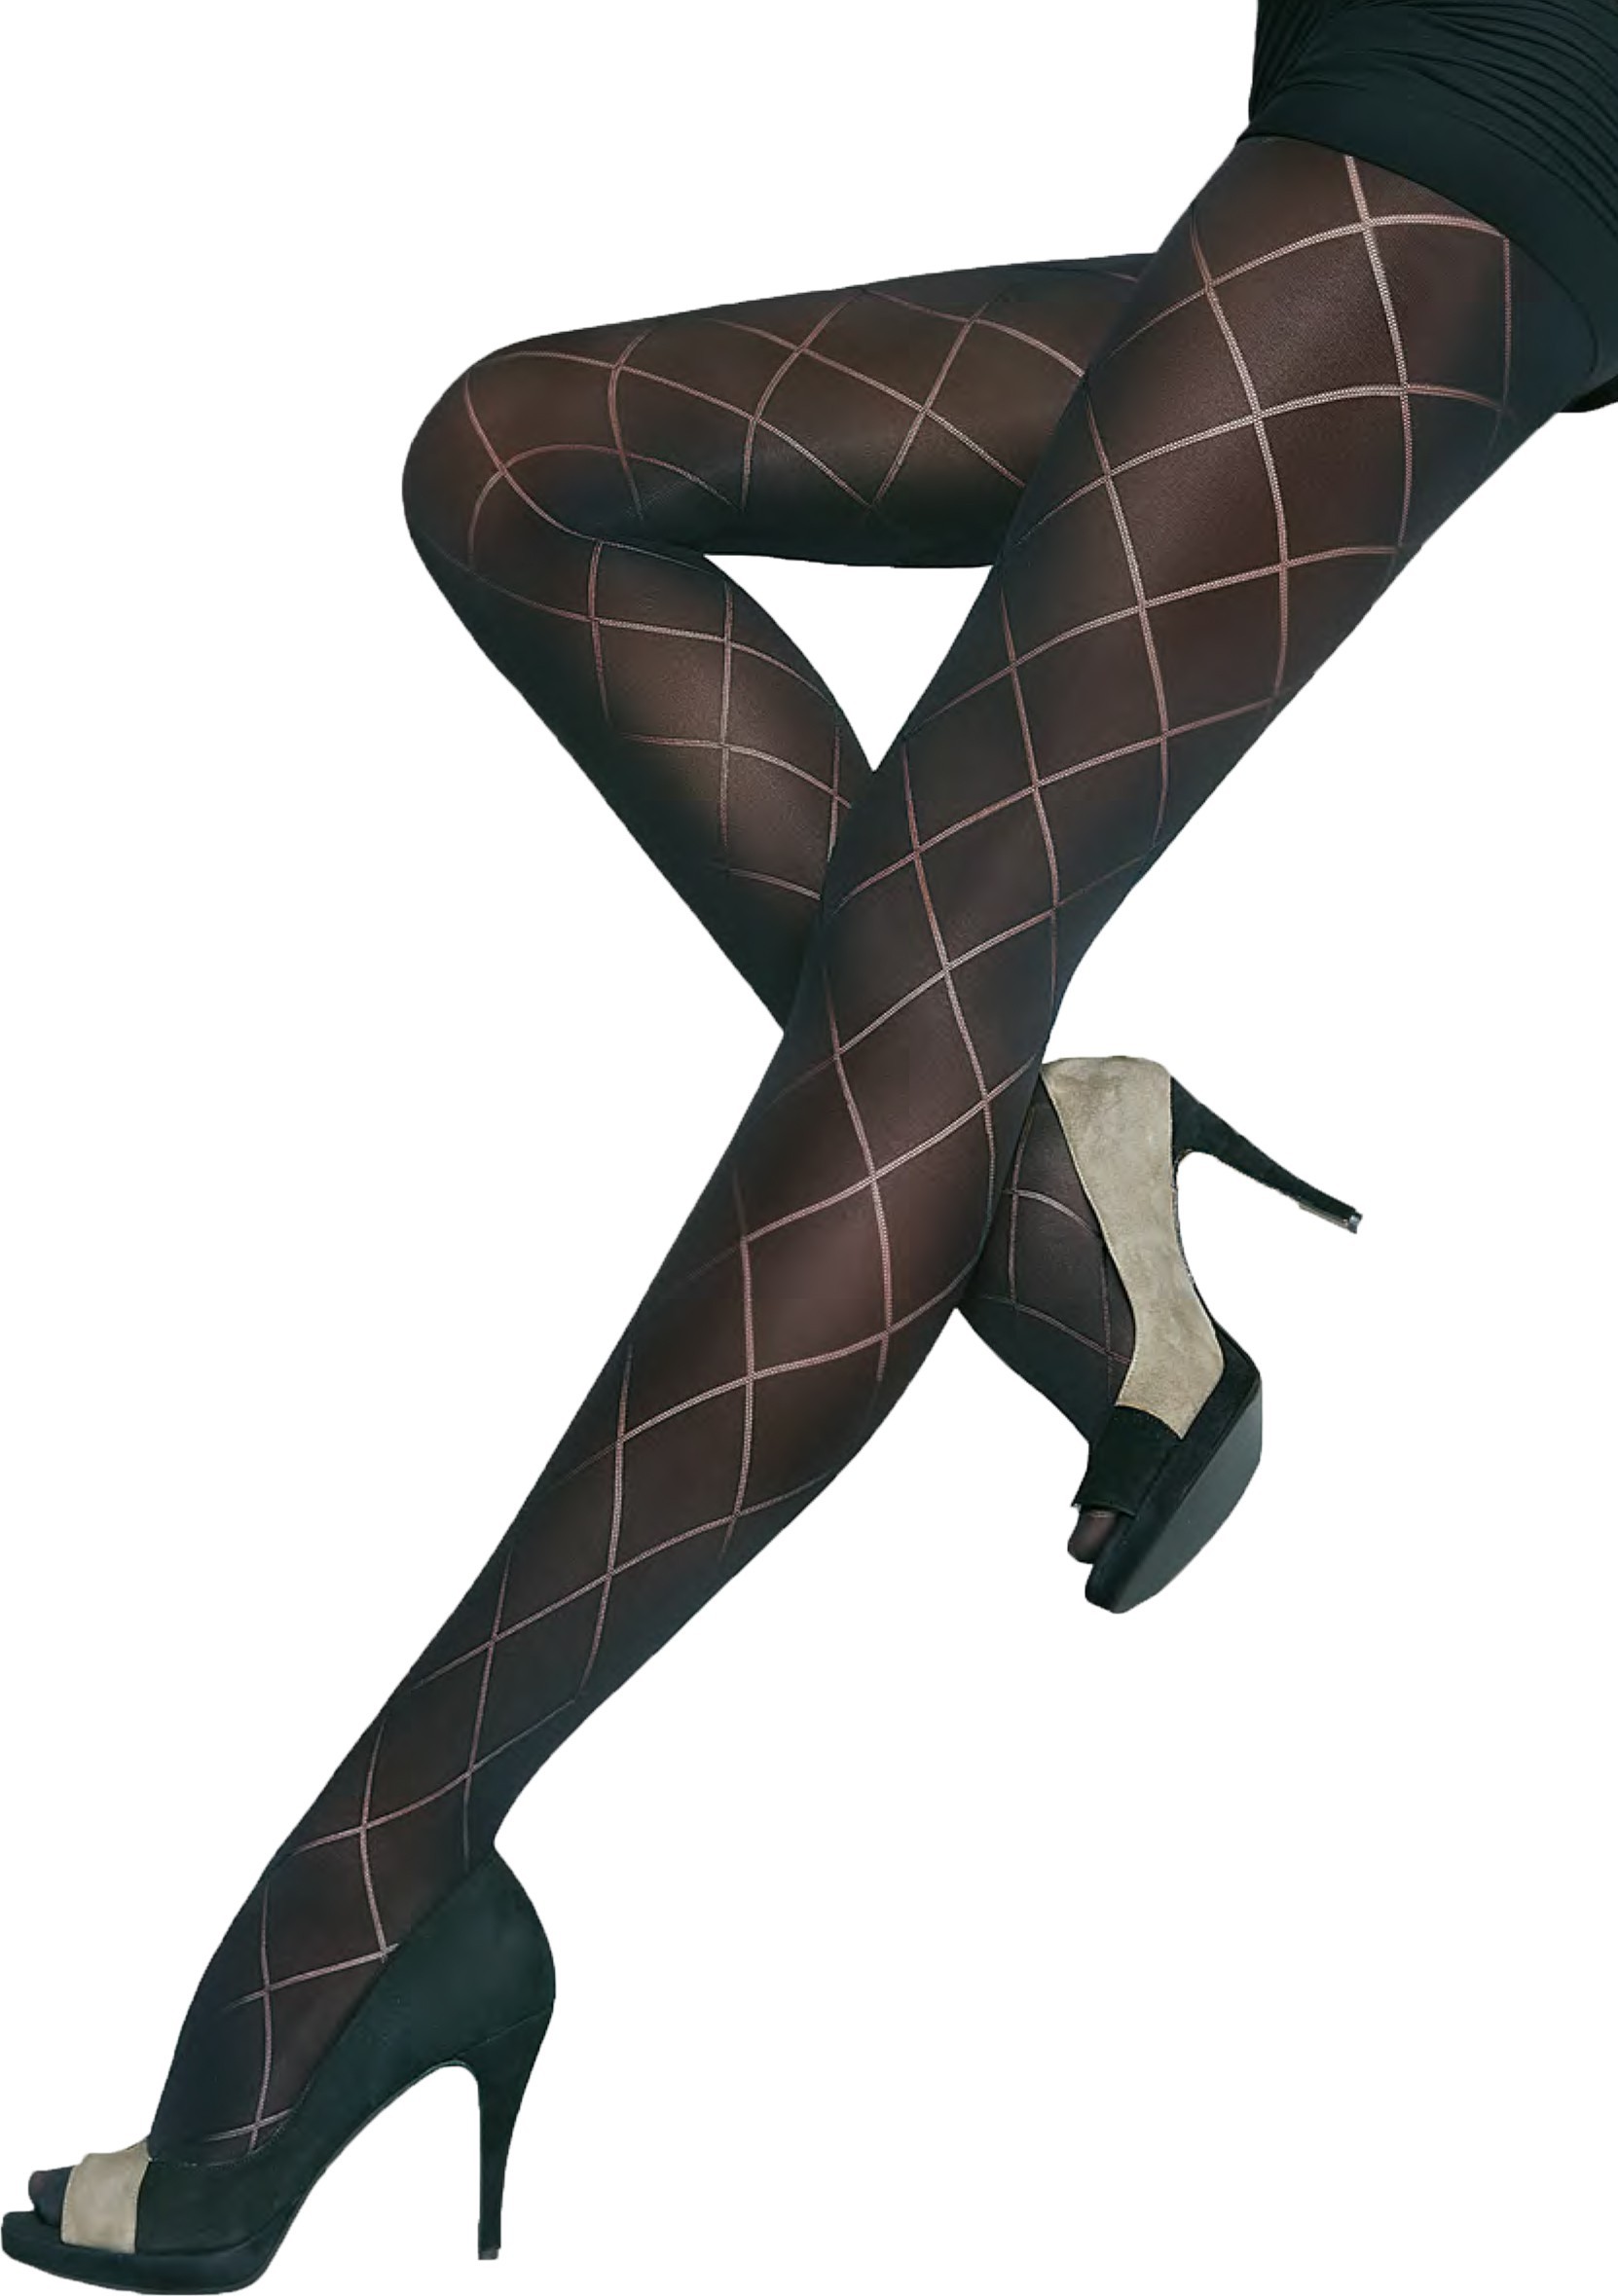 Megan beautiful semi opaque patterned tights 40 Denier by Adrian